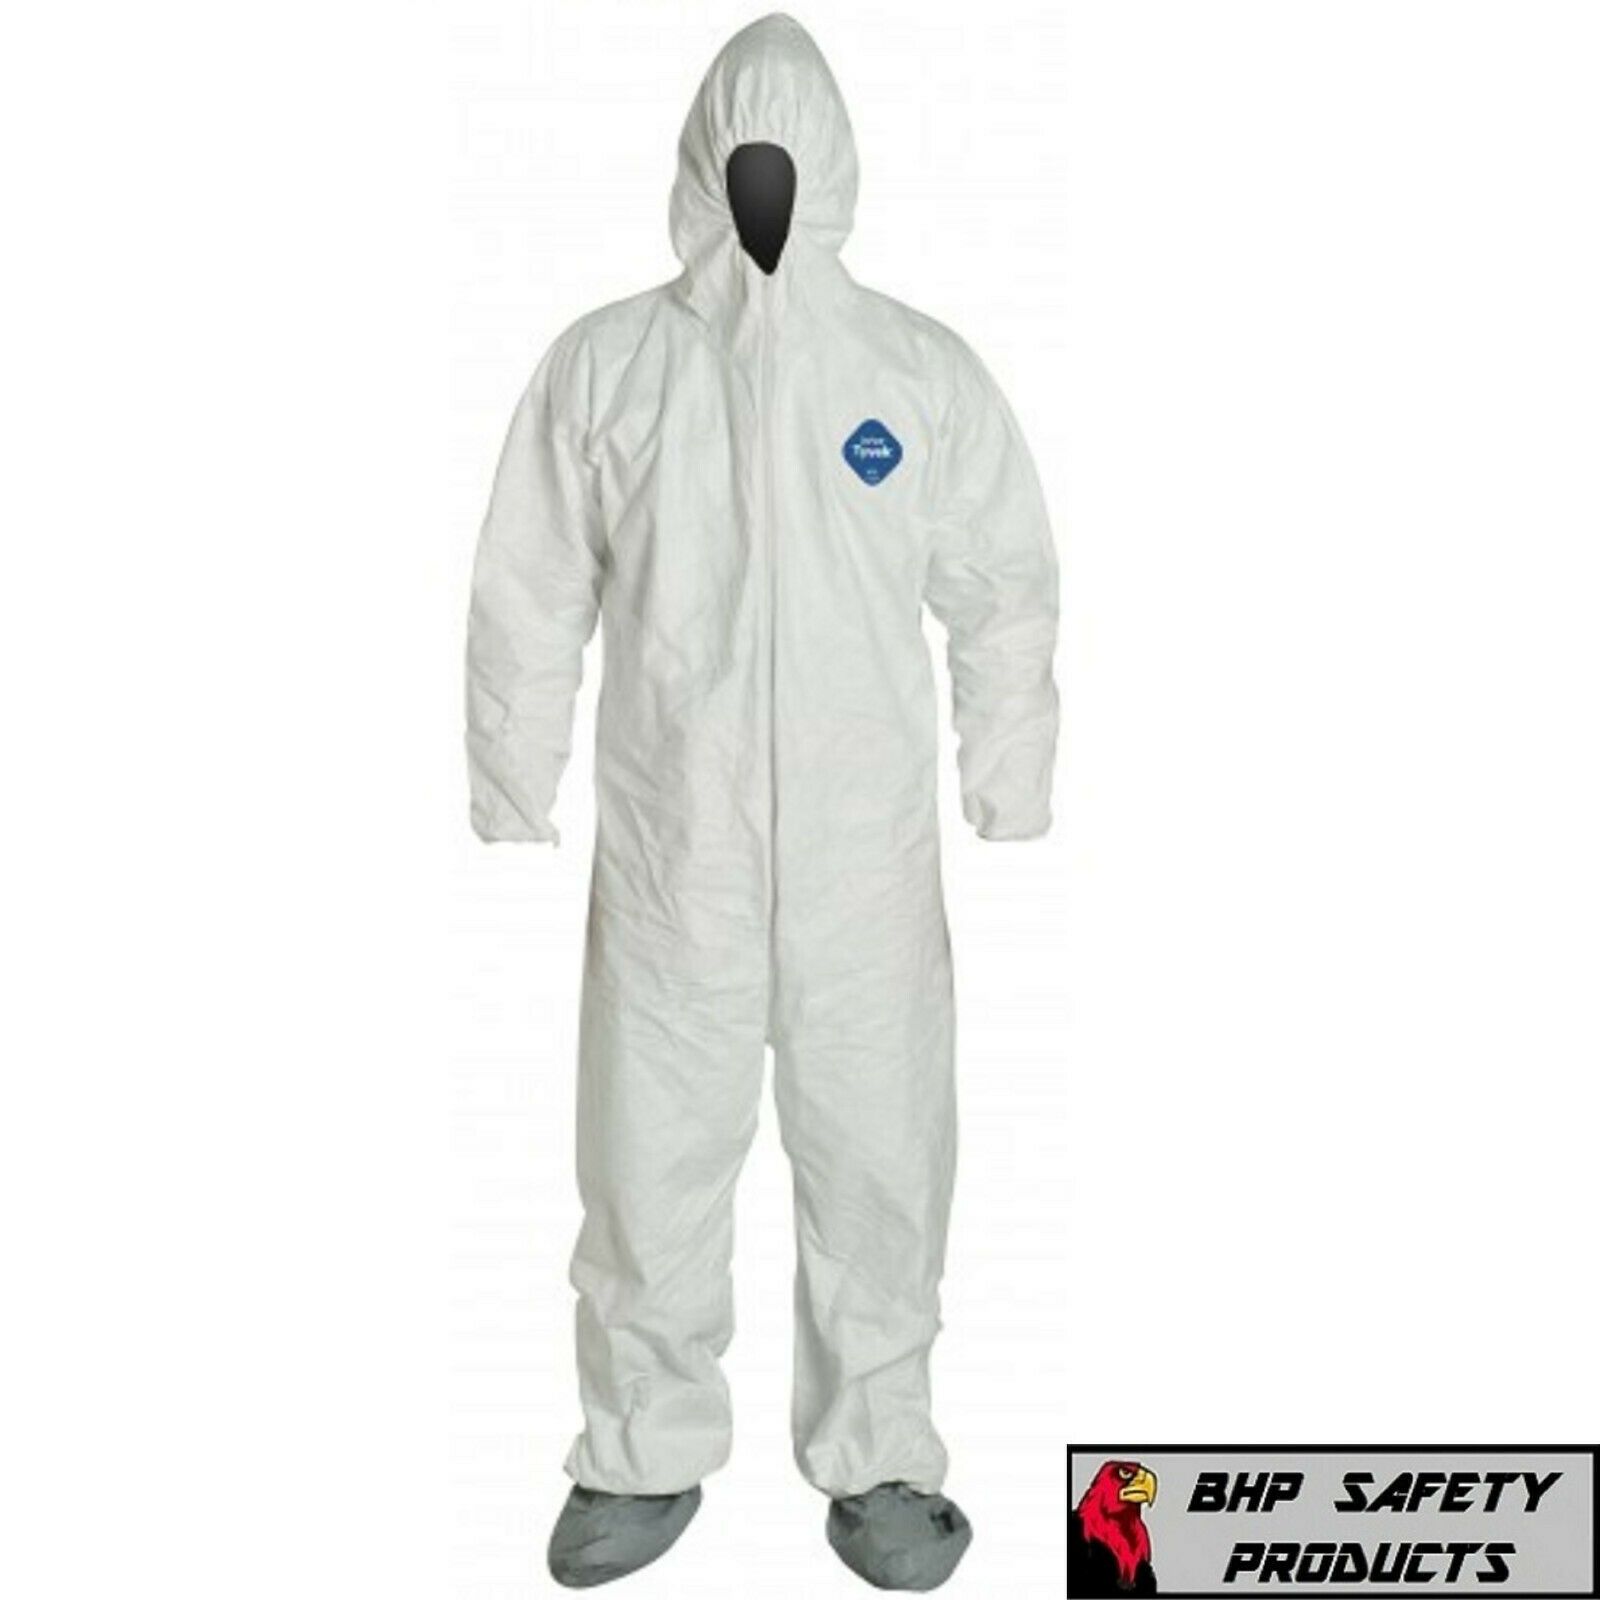 Dupont Ty122s White Tyvek Coverall Bunny Suit Hood & Boots, Hazardous Materials